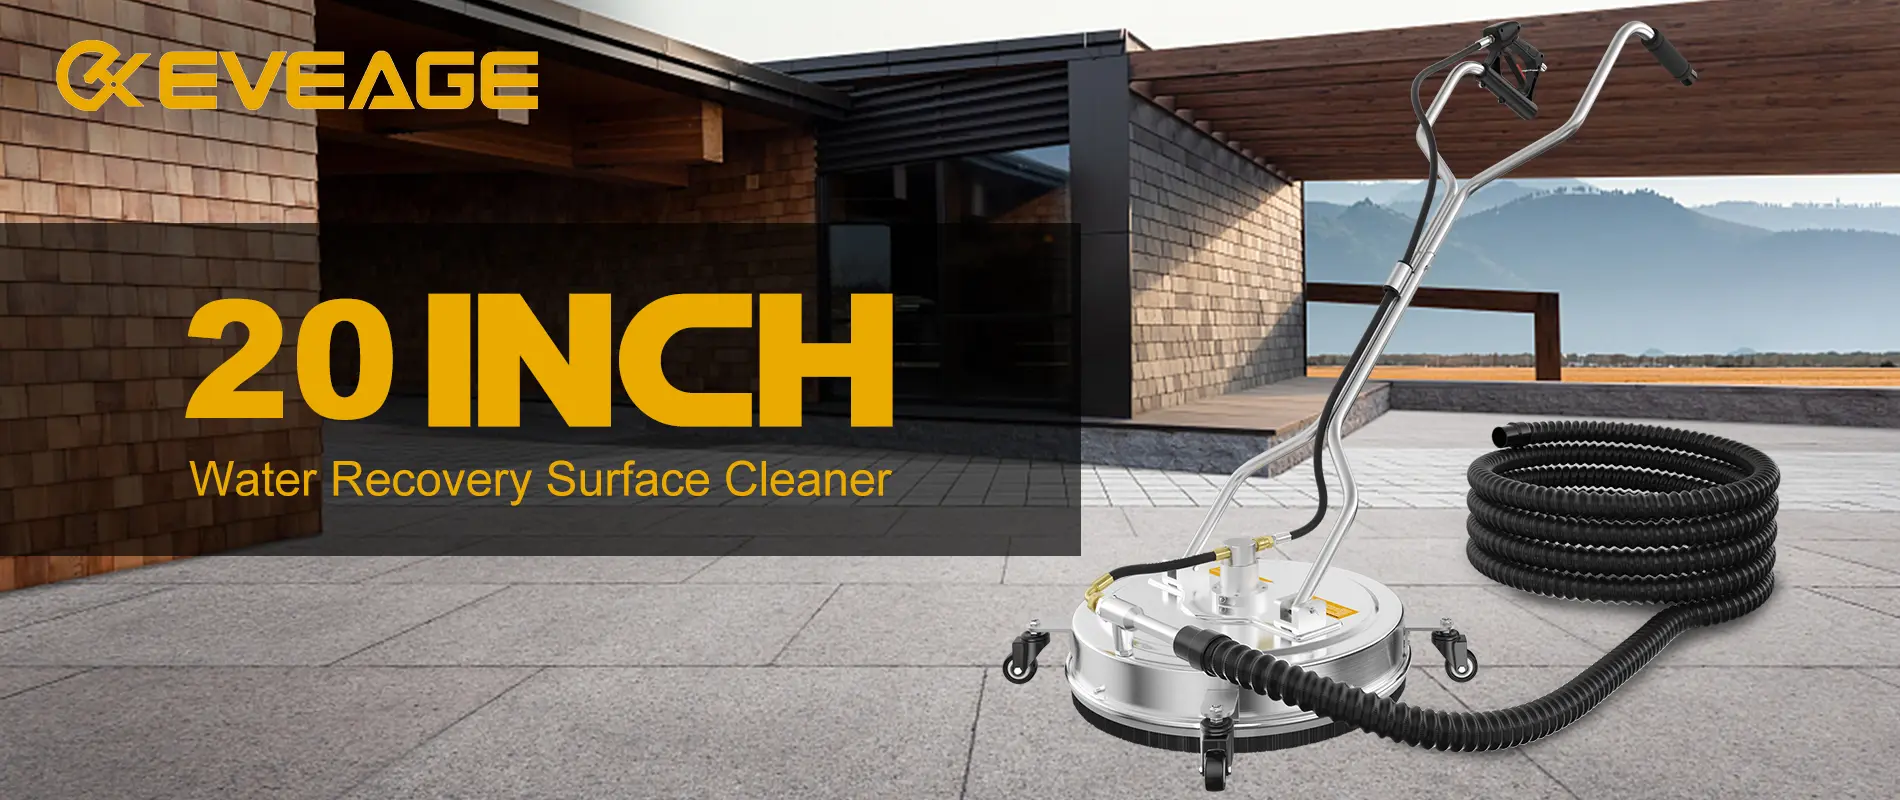 eveage surface cleaner